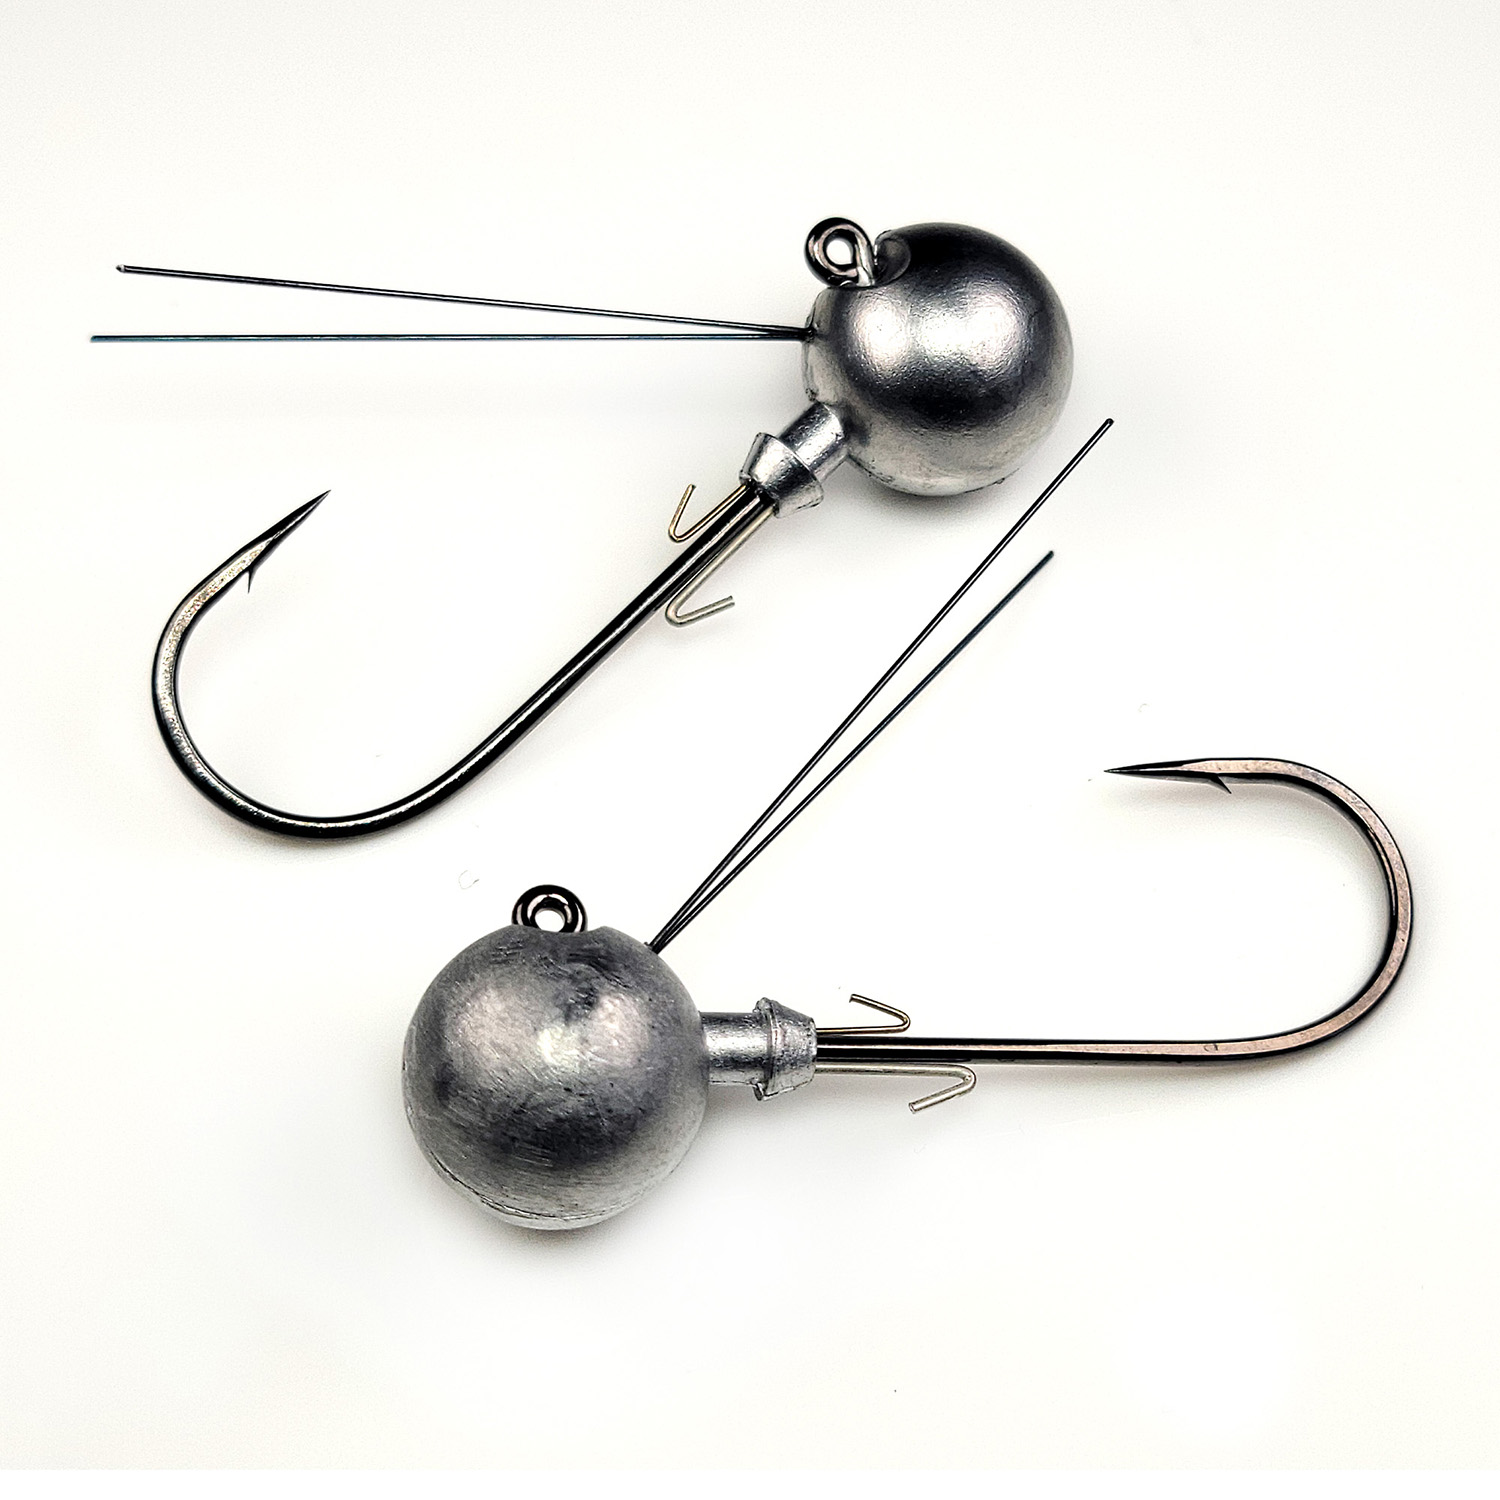 Gamakatsu® Adds a Weedless Option With the Round 26 Weedless Jig Hooks –  Anglers Channel